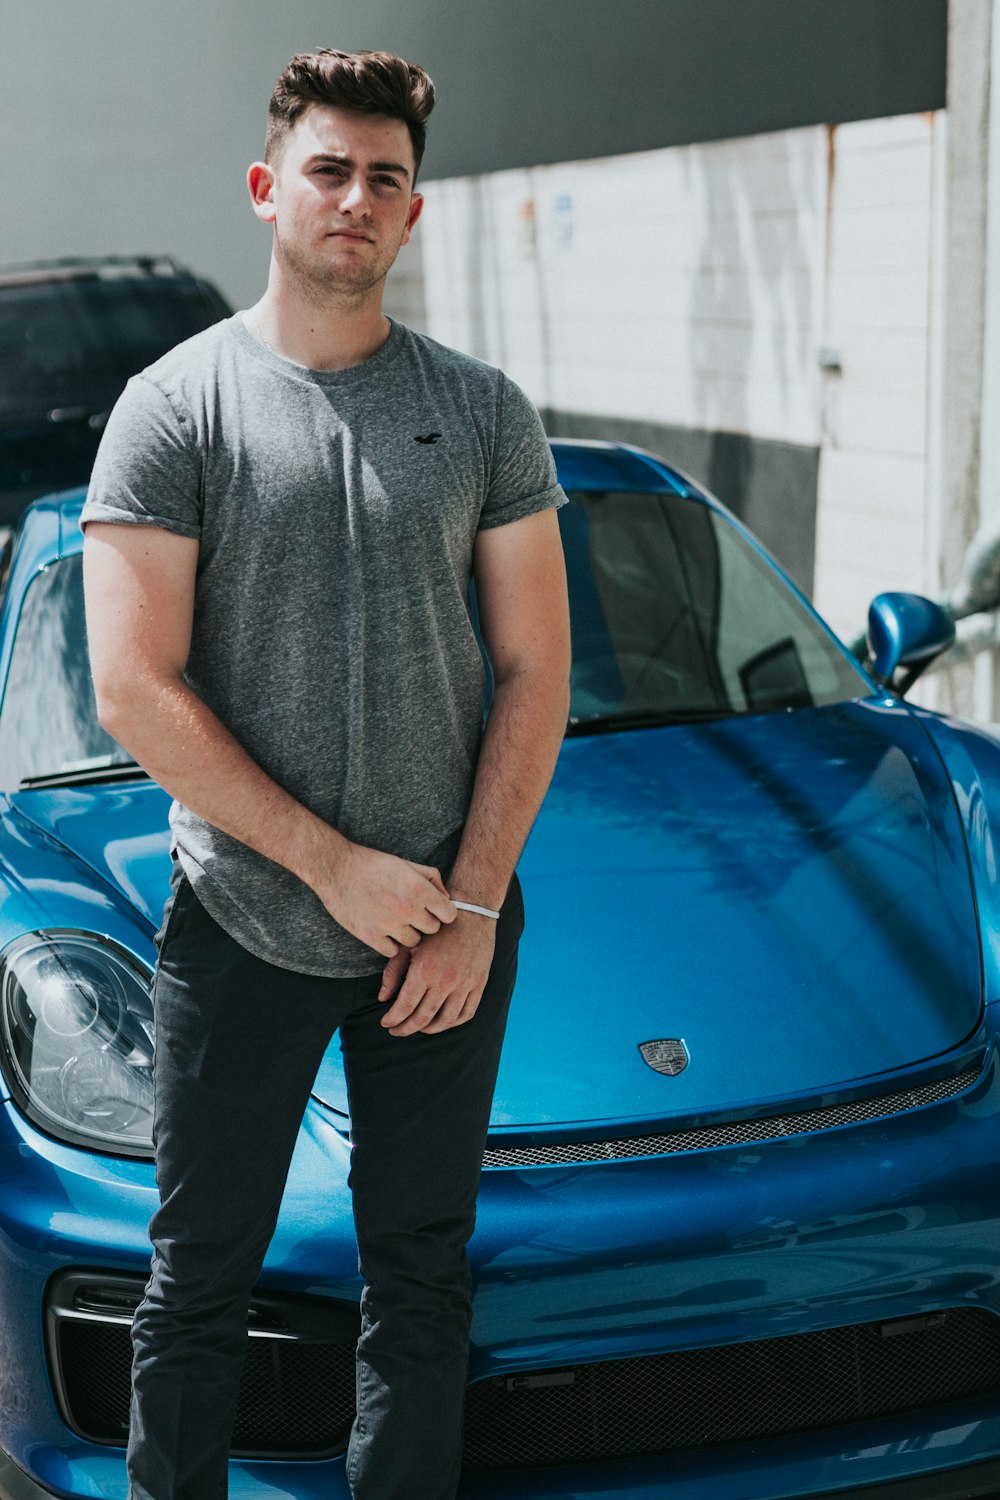 man wearing grey t-shirt and black pants standing in front of blue Porsche vehcile